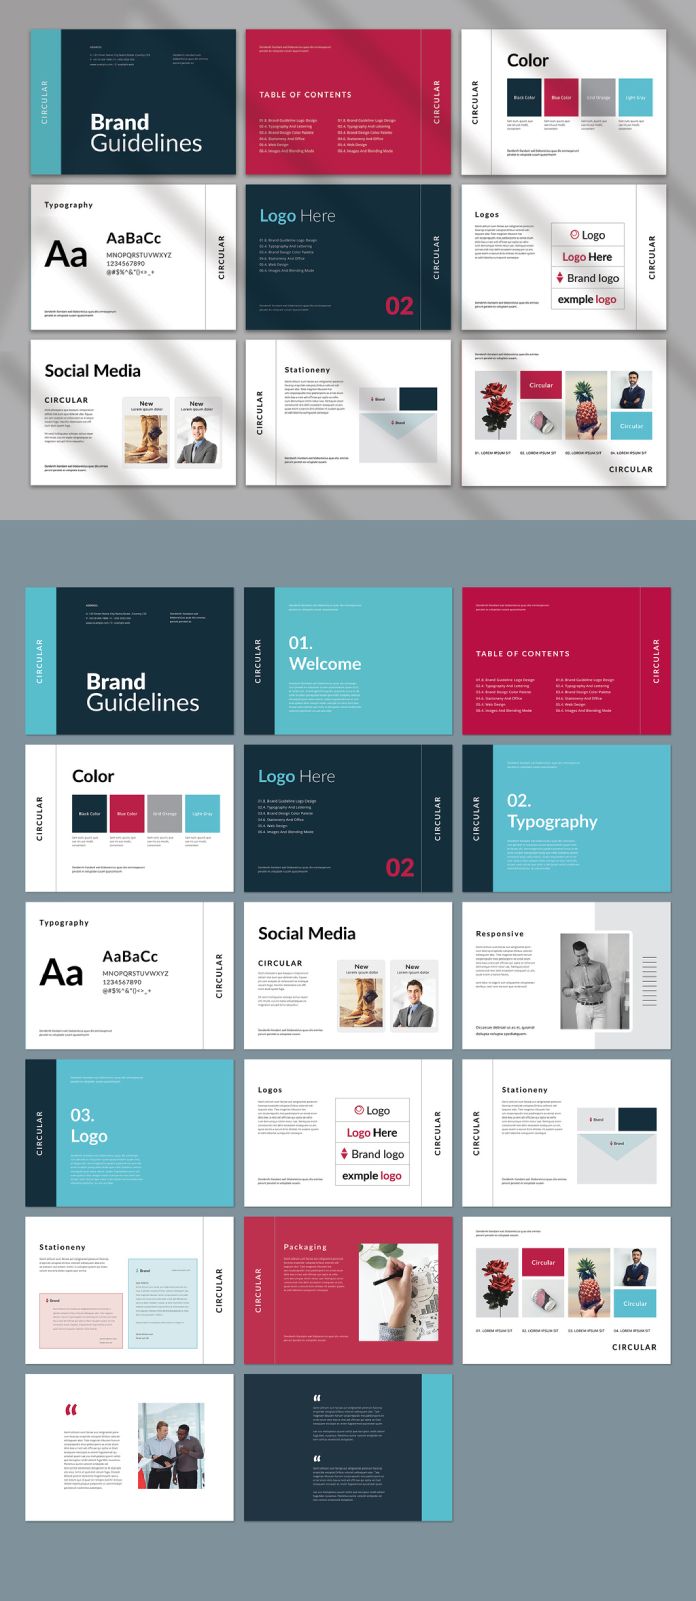 Modern Brand Guidelines Template with 17 Pages